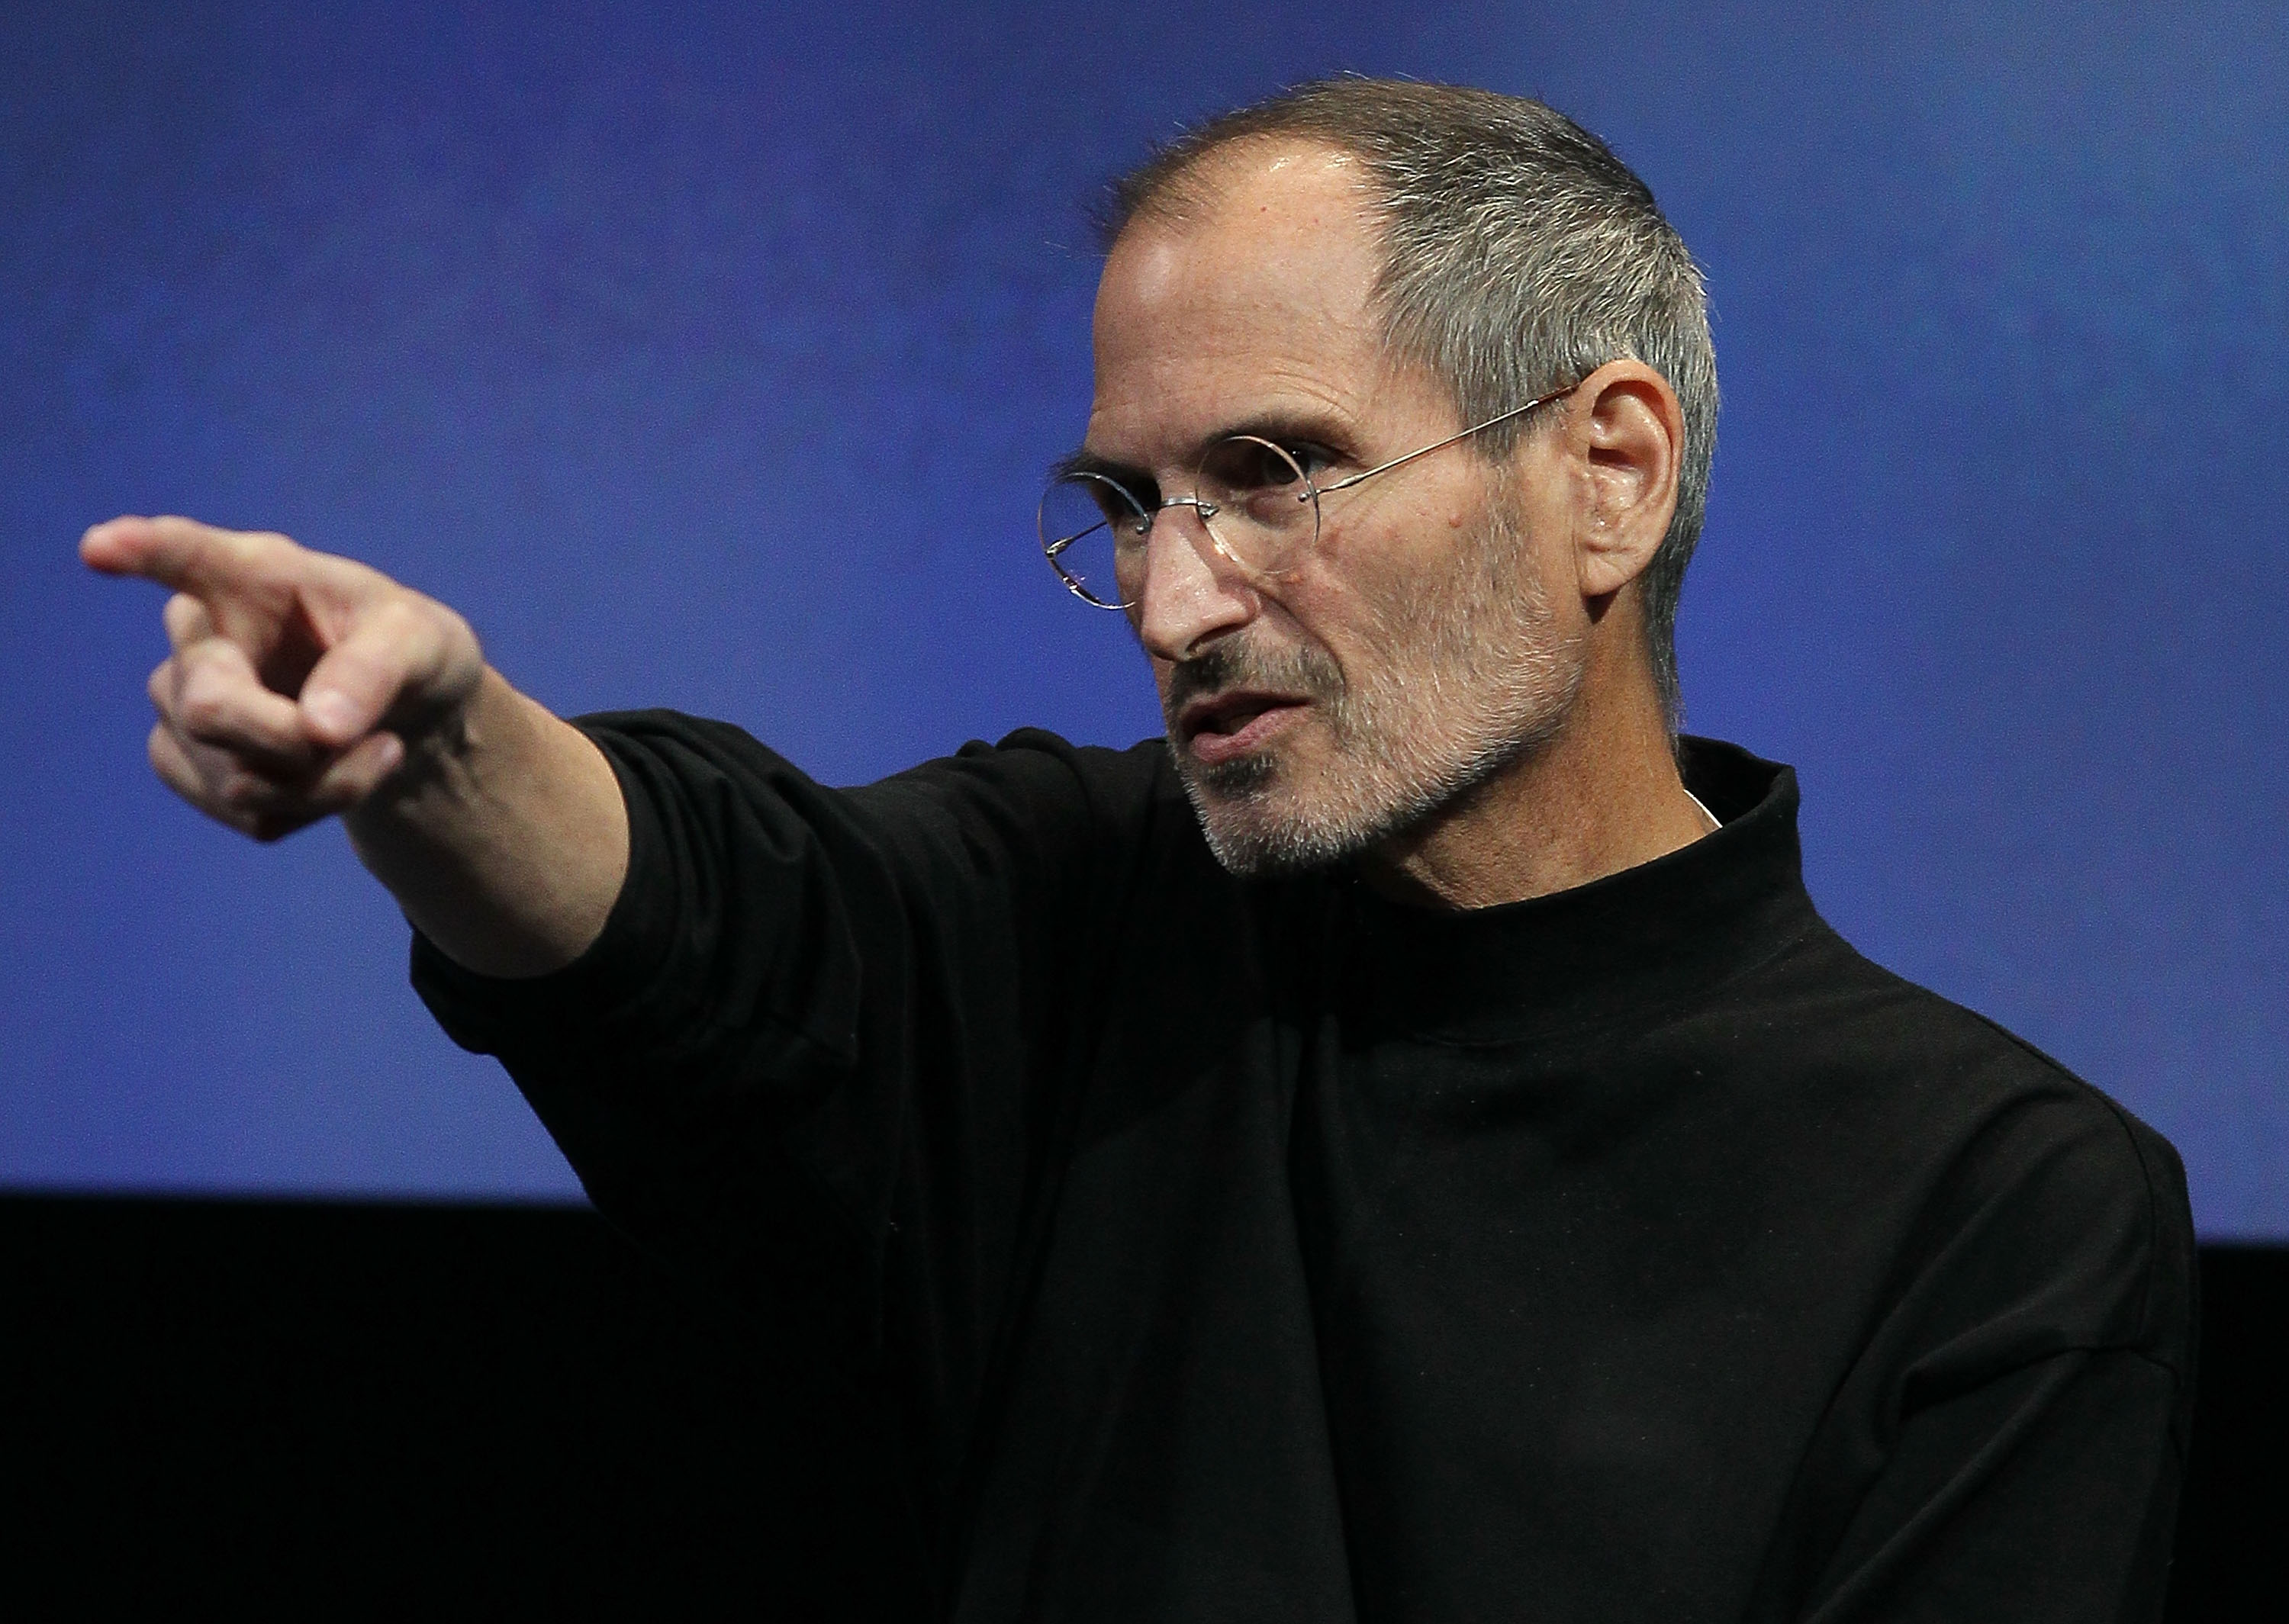 Steve Jobs points during an Apple event